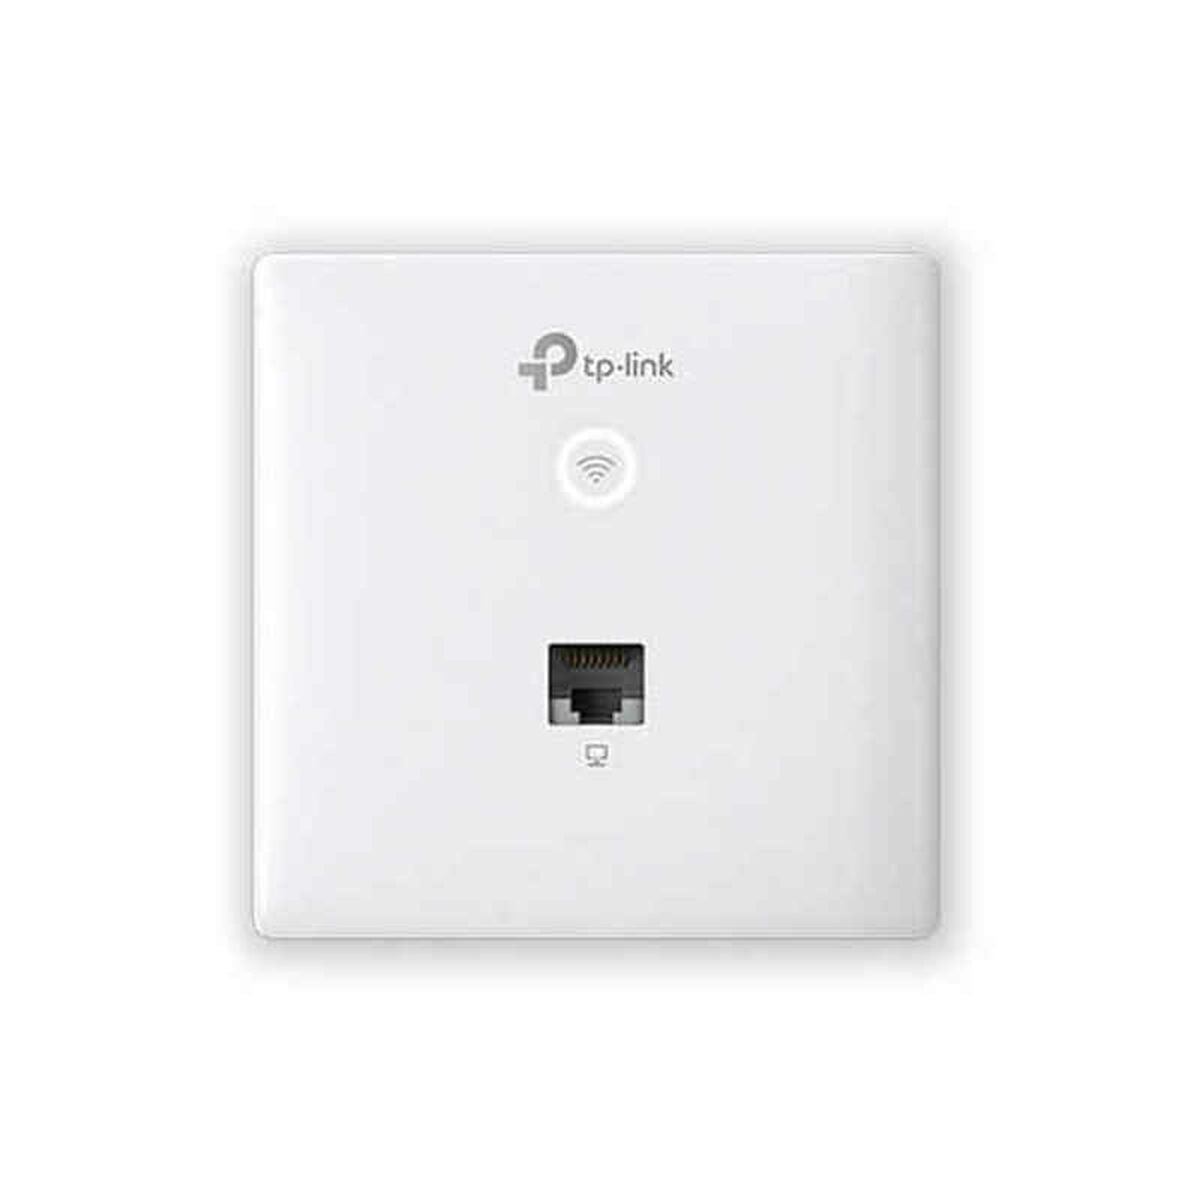 Access point TP-Link EAP230-WALL, TP-Link, Computing, Network devices, access-point-tp-link-eap230-wall, Brand_TP-Link, category-reference-2609, category-reference-2803, category-reference-2820, category-reference-t-19685, category-reference-t-19914, Condition_NEW, networks/wiring, Price_50 - 100, Teleworking, RiotNook